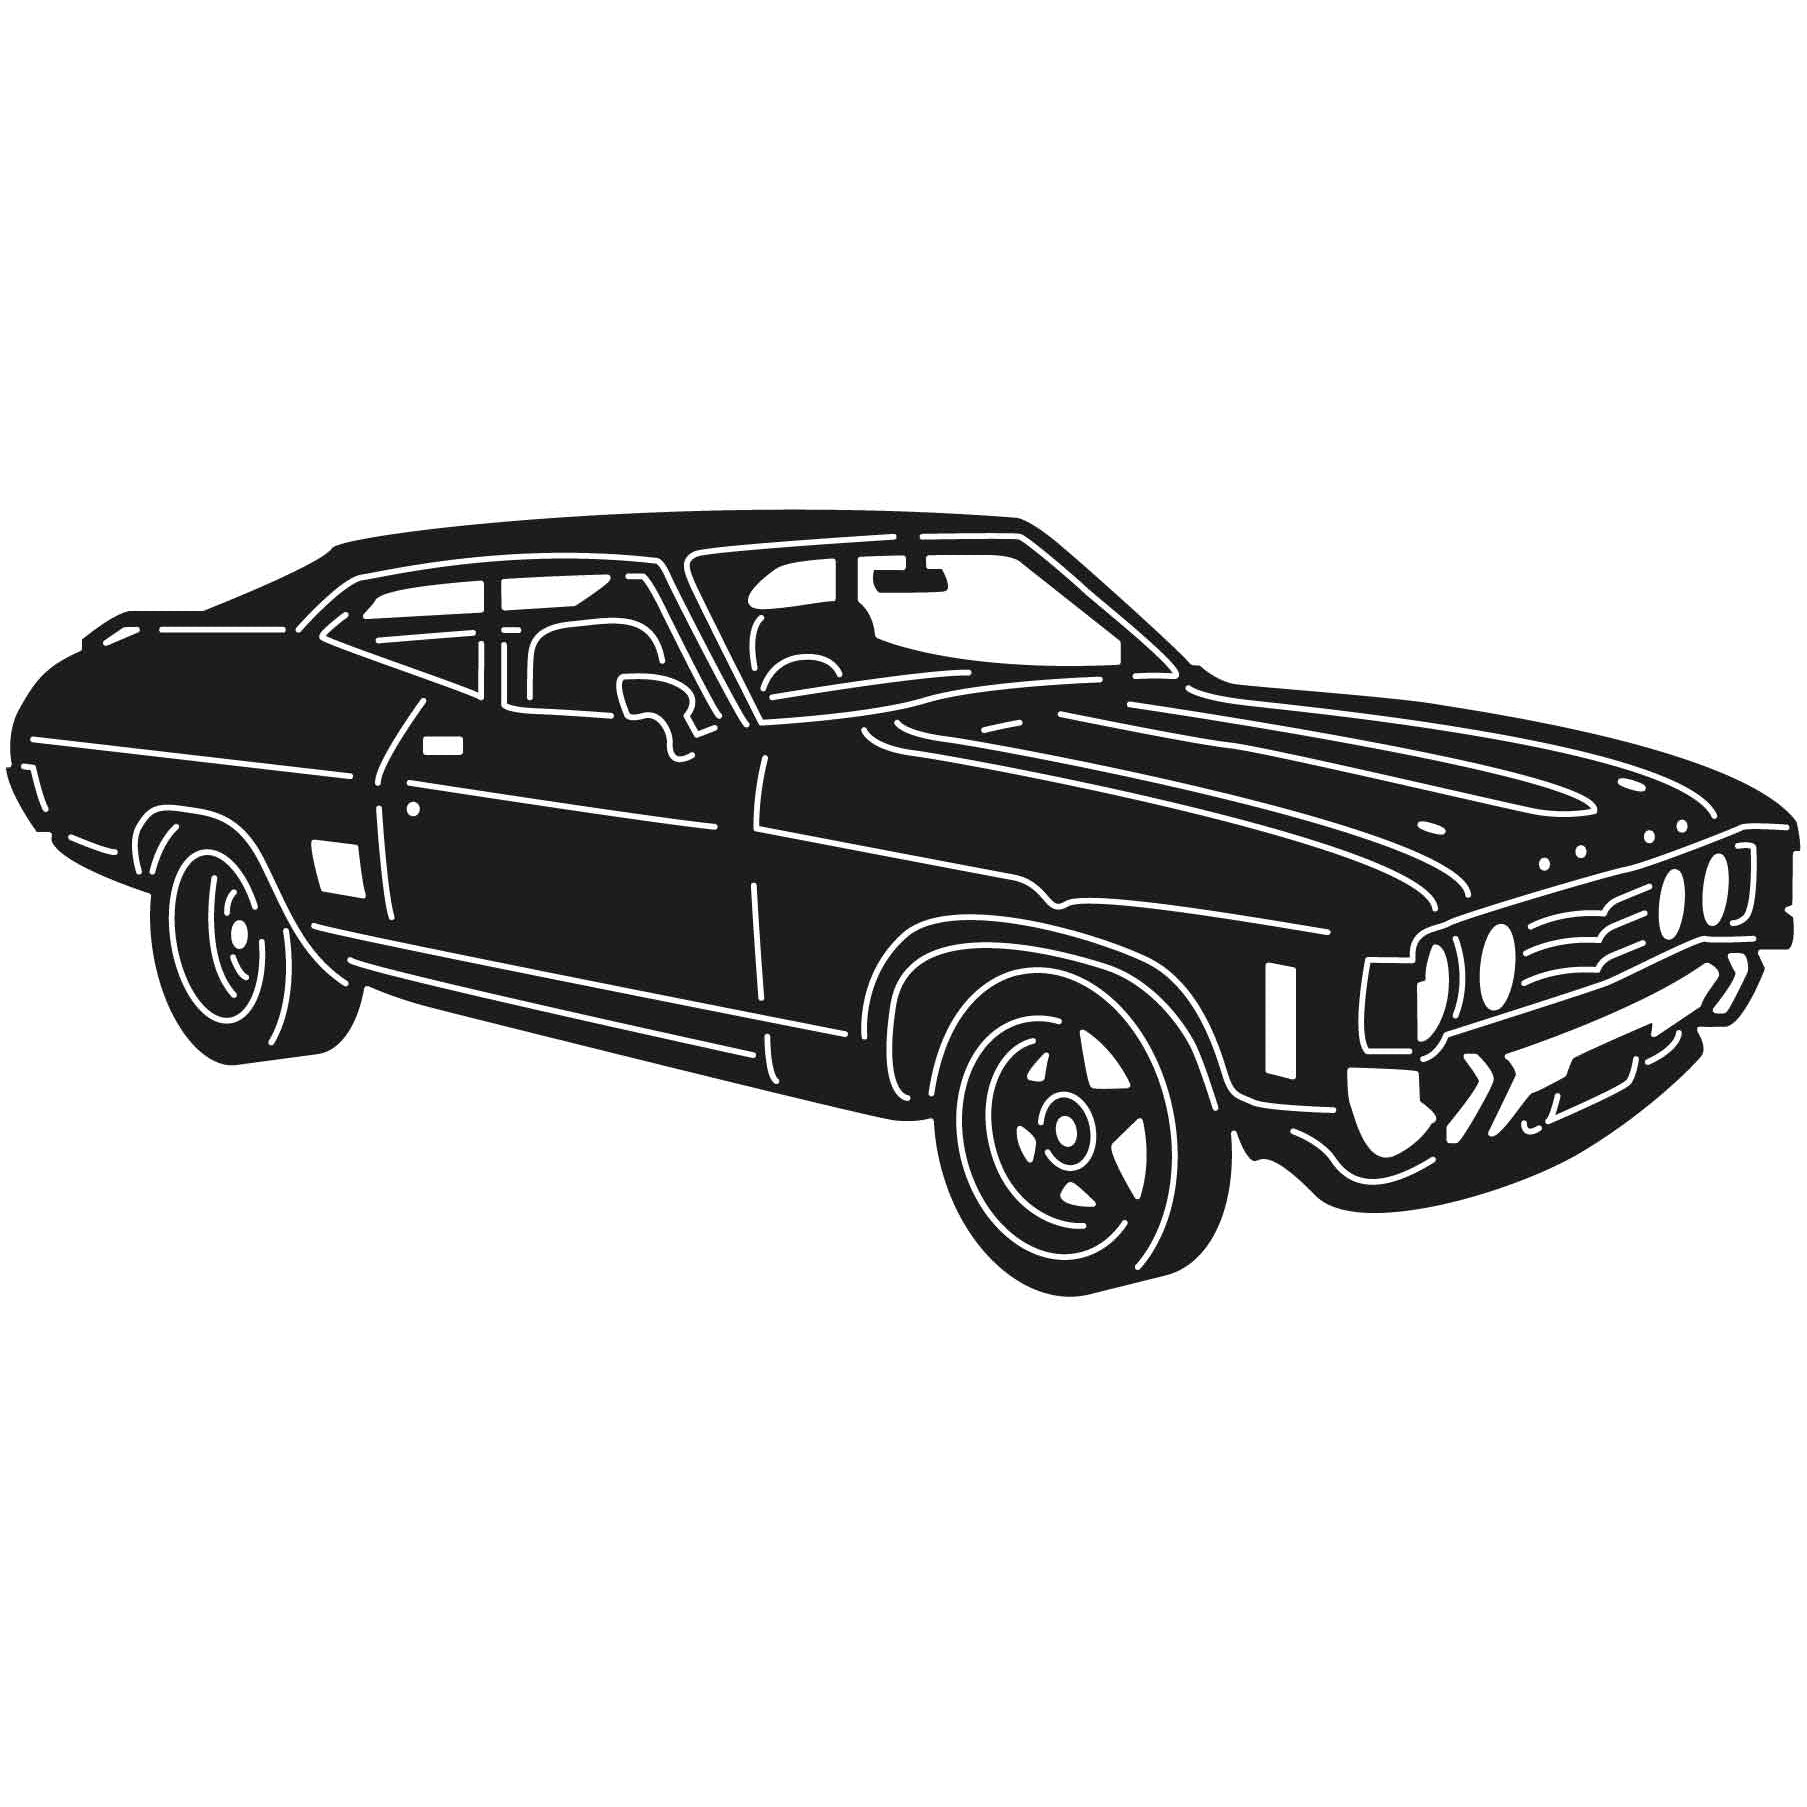 Old Muscle Car Ford XA Coupe-DXF files Cut Ready for CNC-DXFforCNC.com